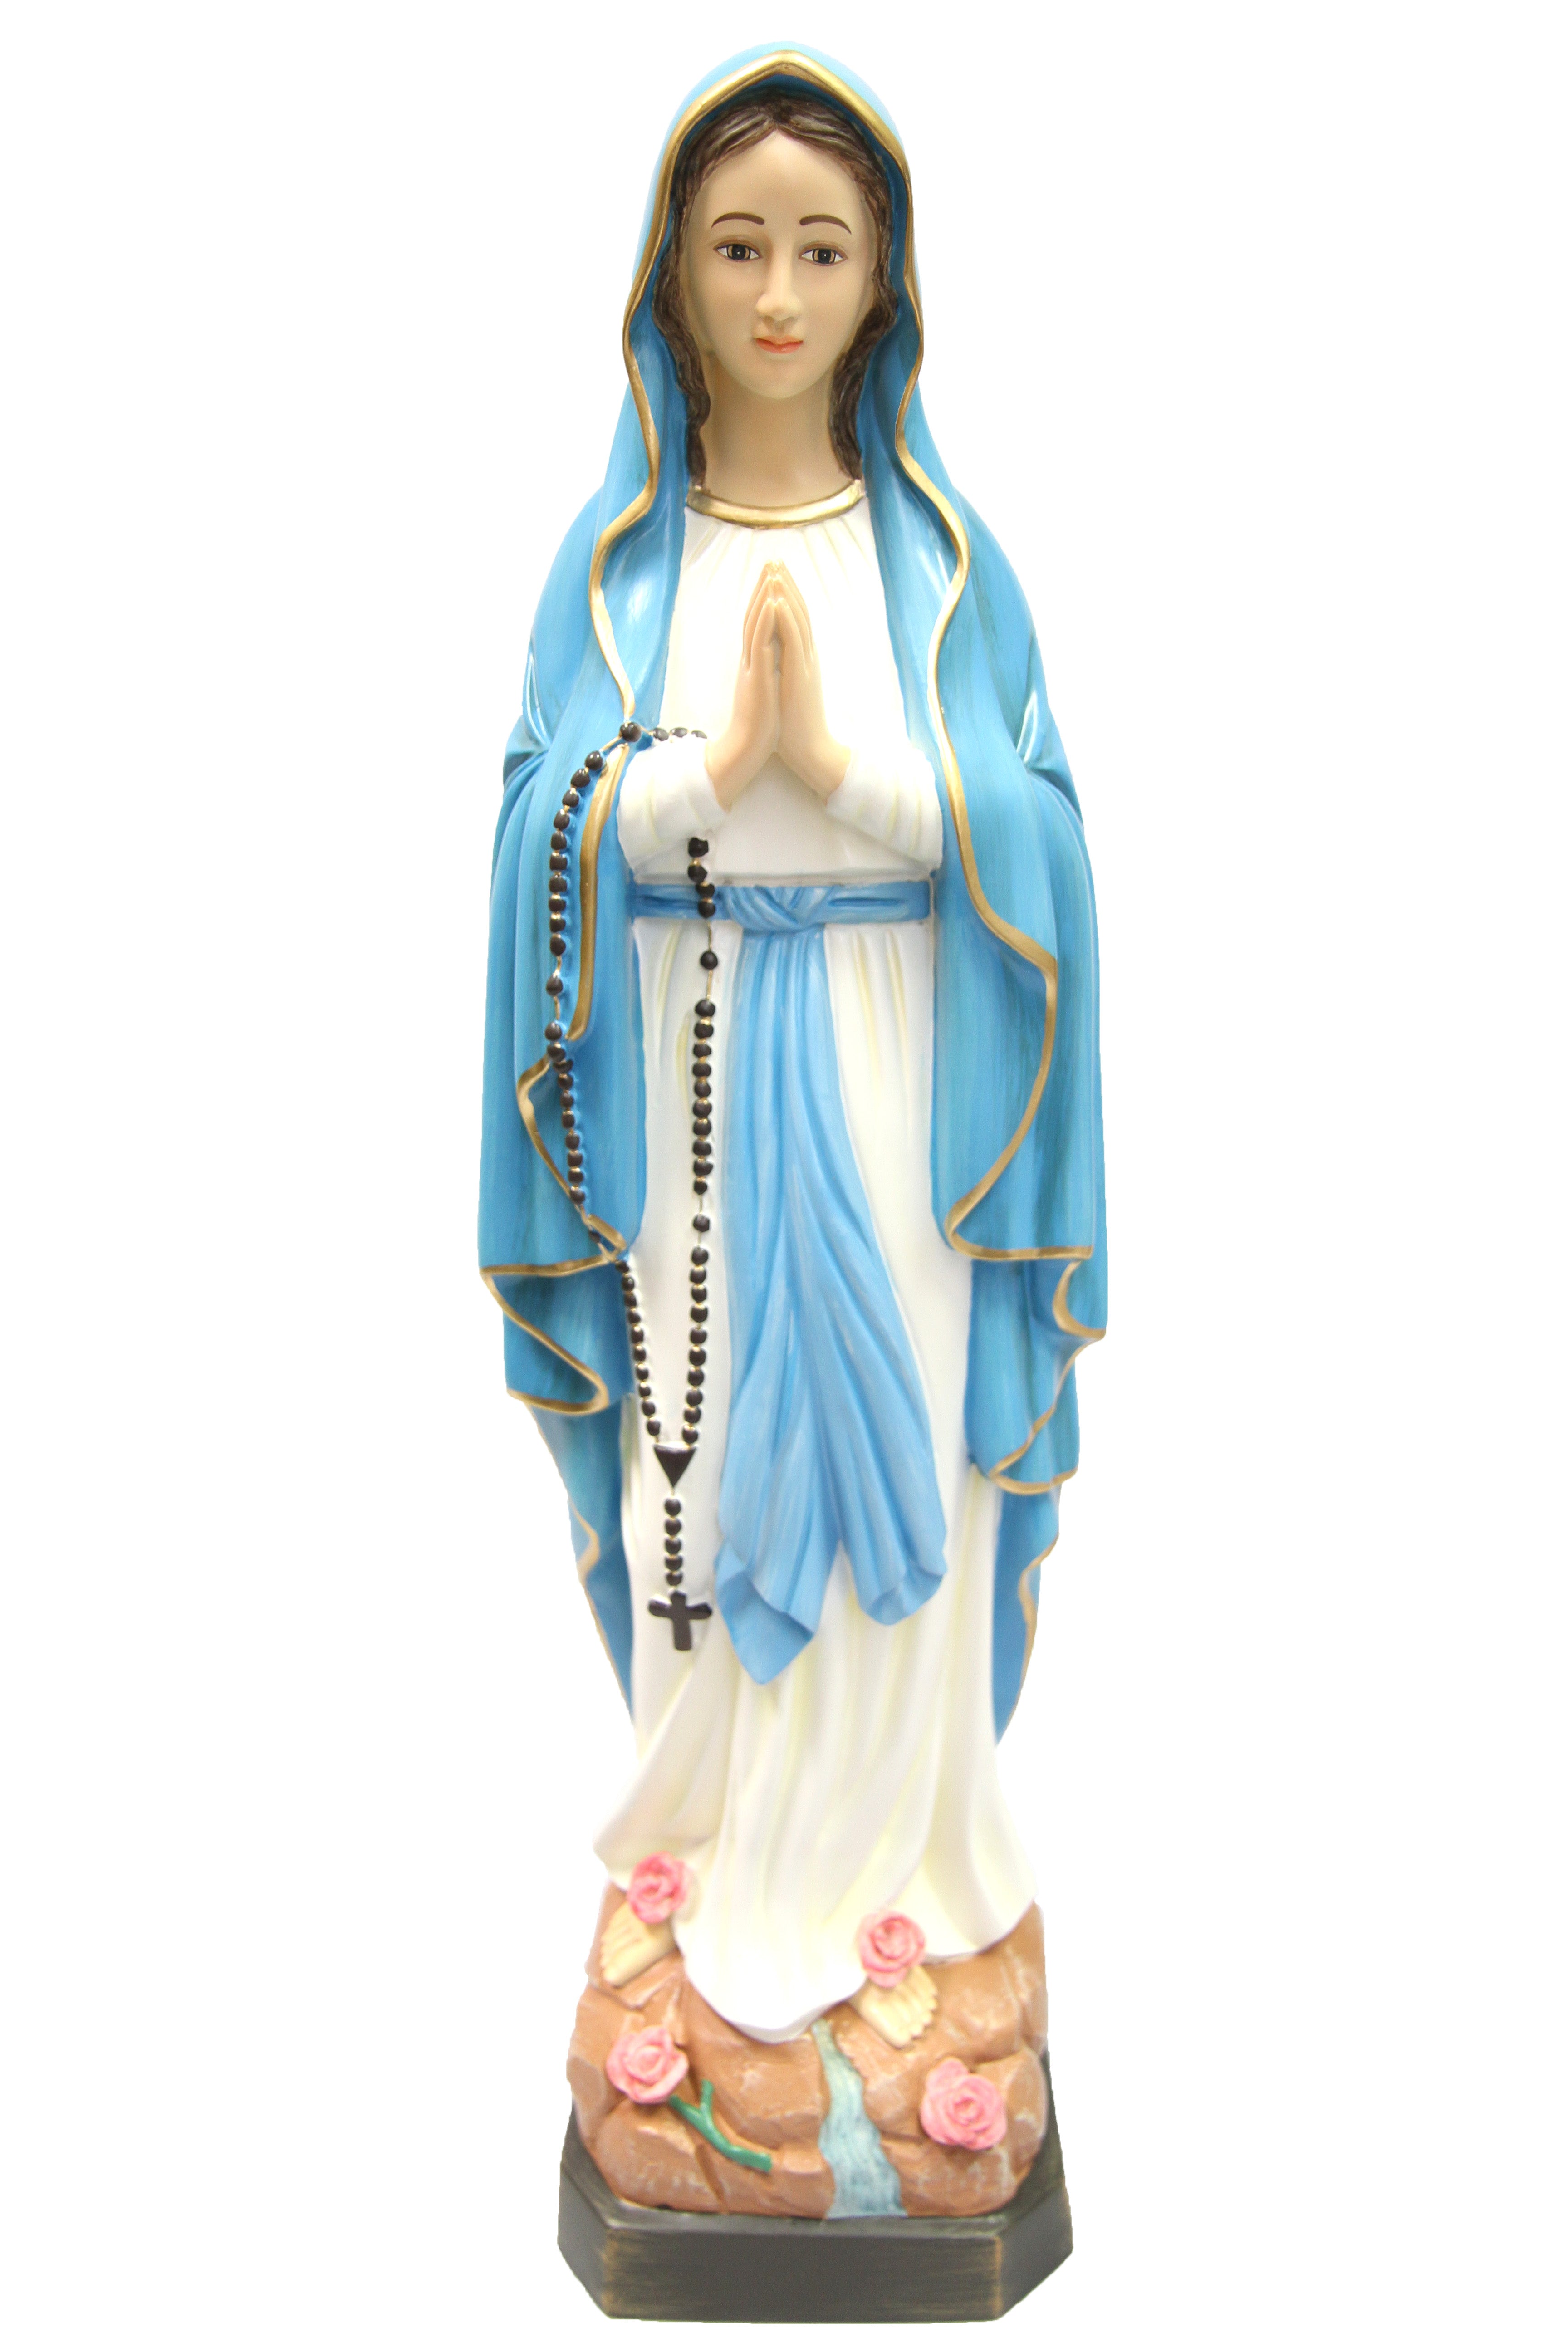 27 Inch Our Lady of Lourdes Catholic Statue Vittoria Collection Made in Italy